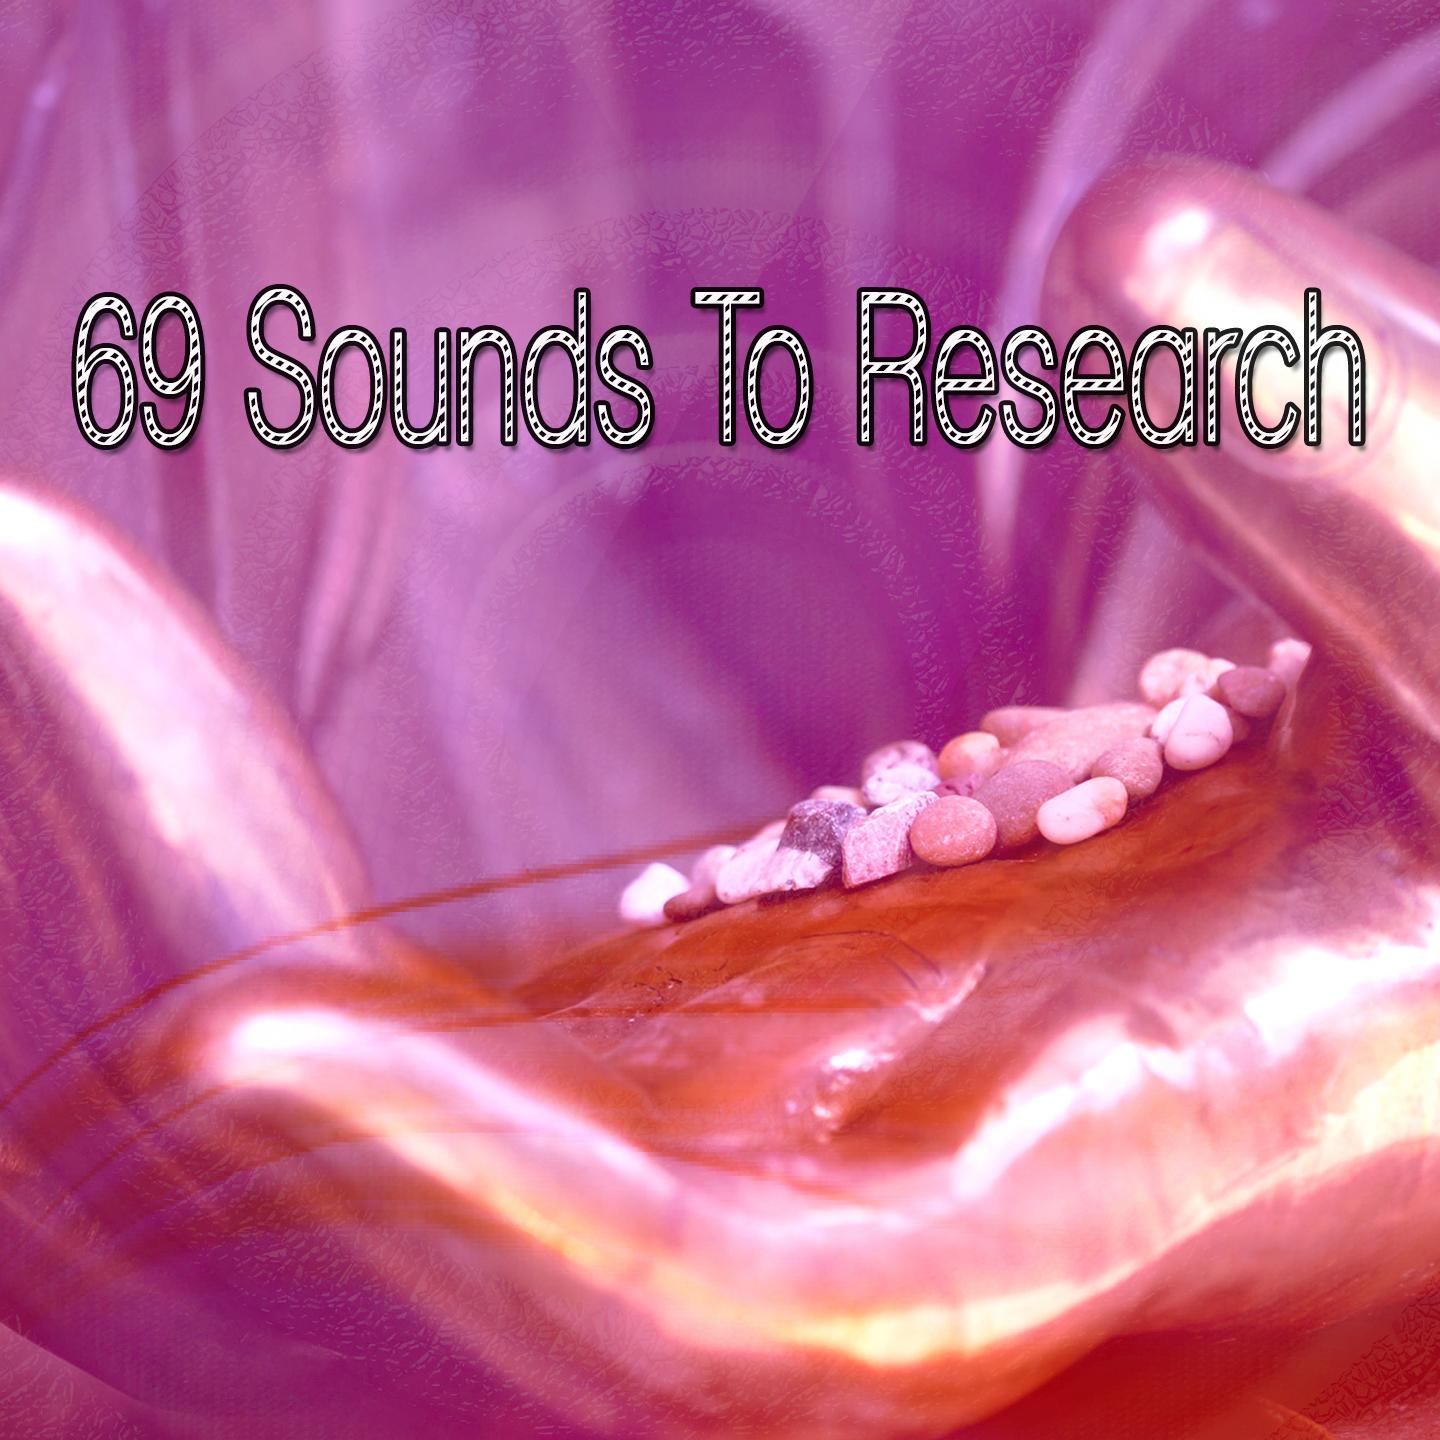 69 Sounds to Research